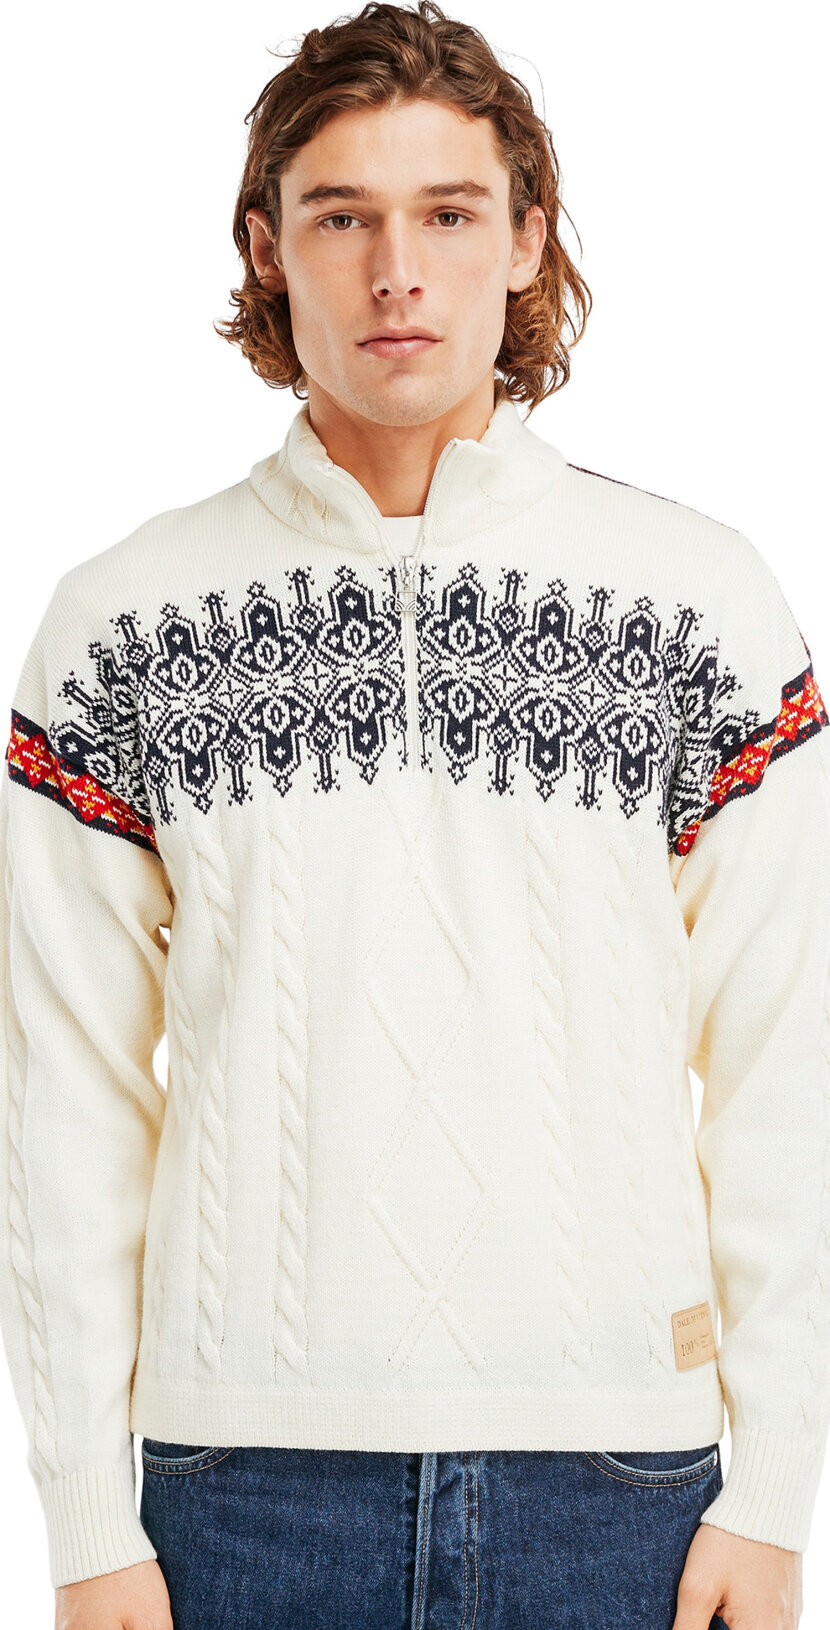 Aspøy Mens Sweater € Norway White Dale by - 199,90 COLDSEASON.com, - of